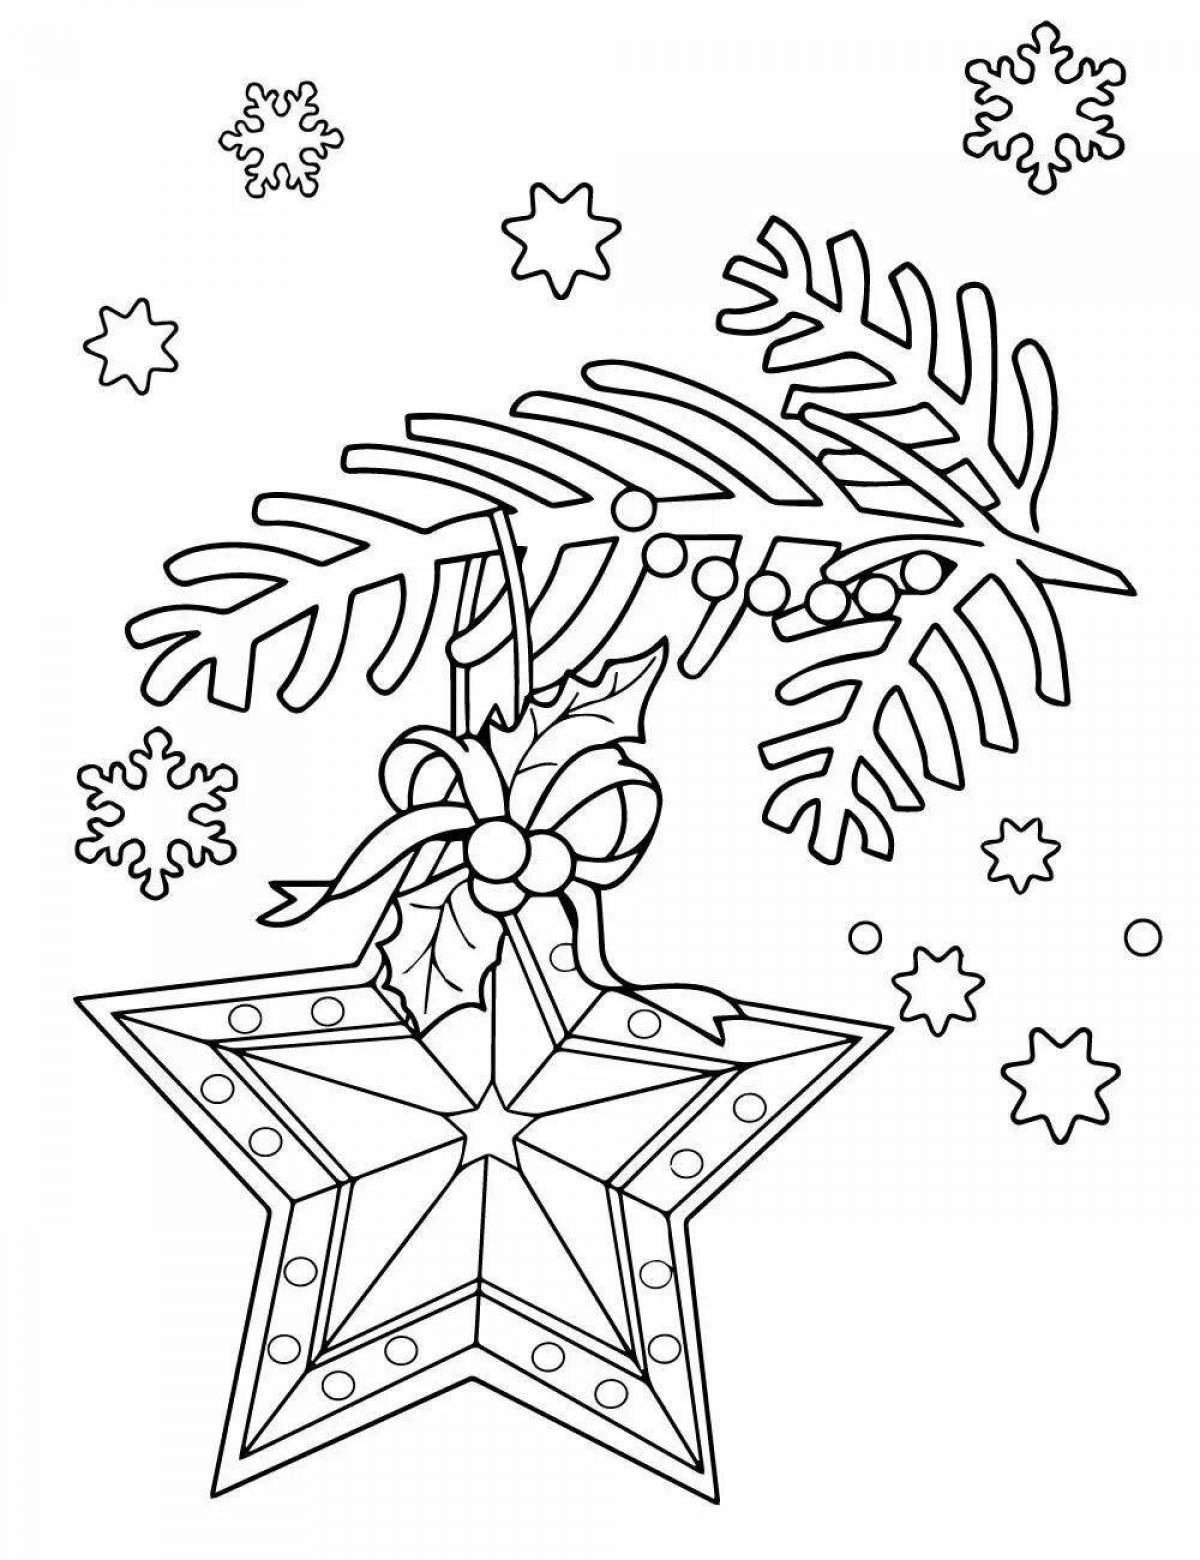 A fun Christmas star coloring book for kids